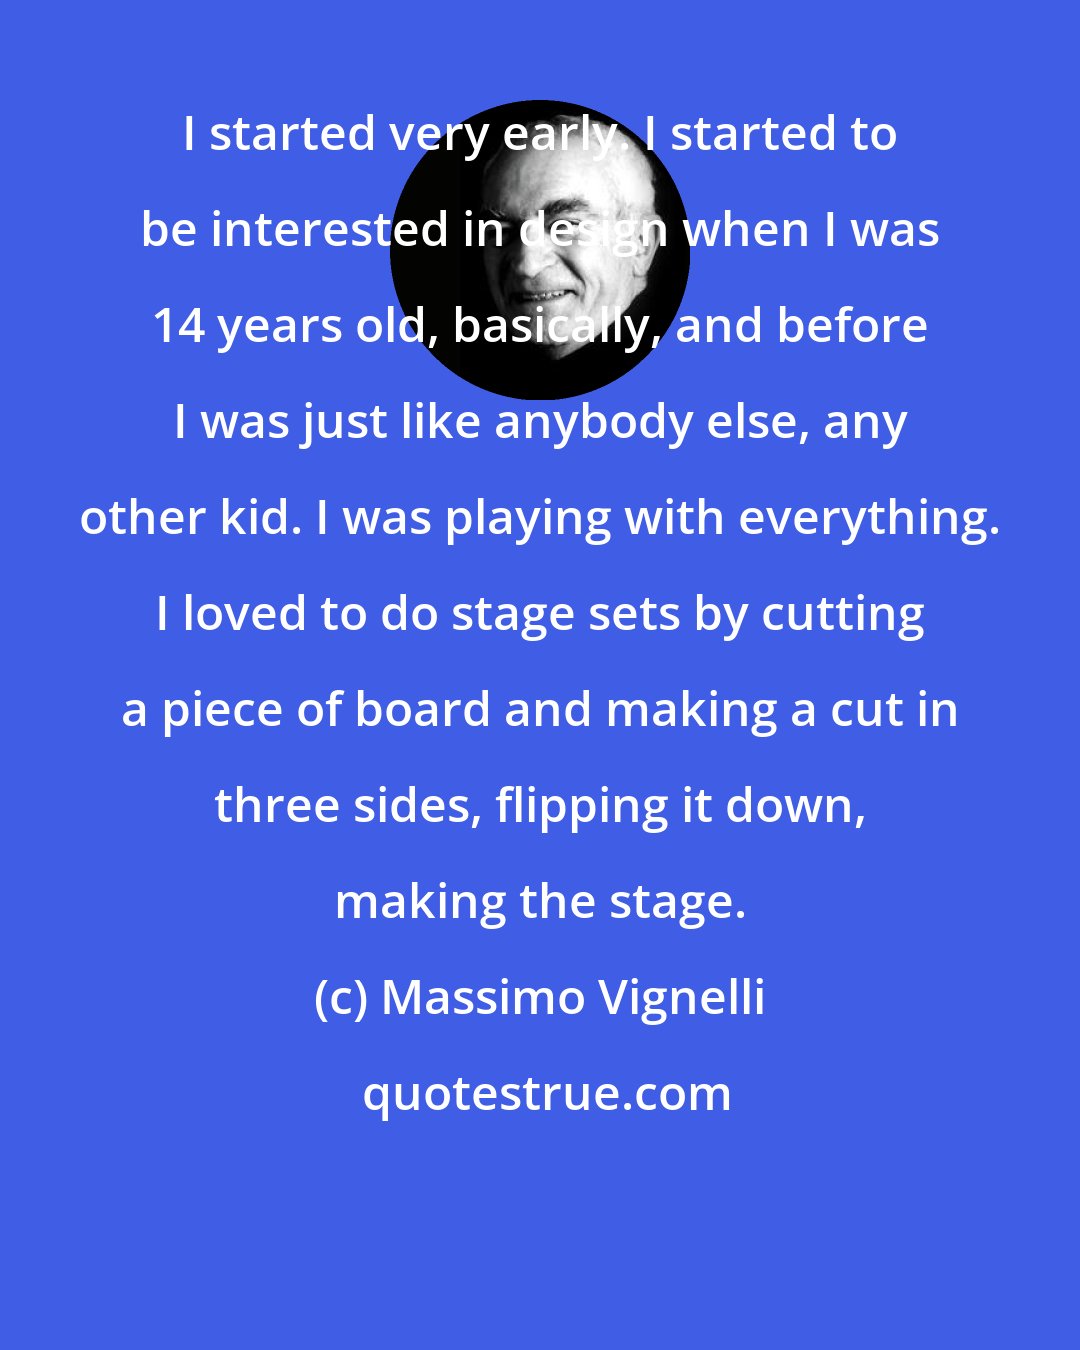 Massimo Vignelli: I started very early. I started to be interested in design when I was 14 years old, basically, and before I was just like anybody else, any other kid. I was playing with everything. I loved to do stage sets by cutting a piece of board and making a cut in three sides, flipping it down, making the stage.